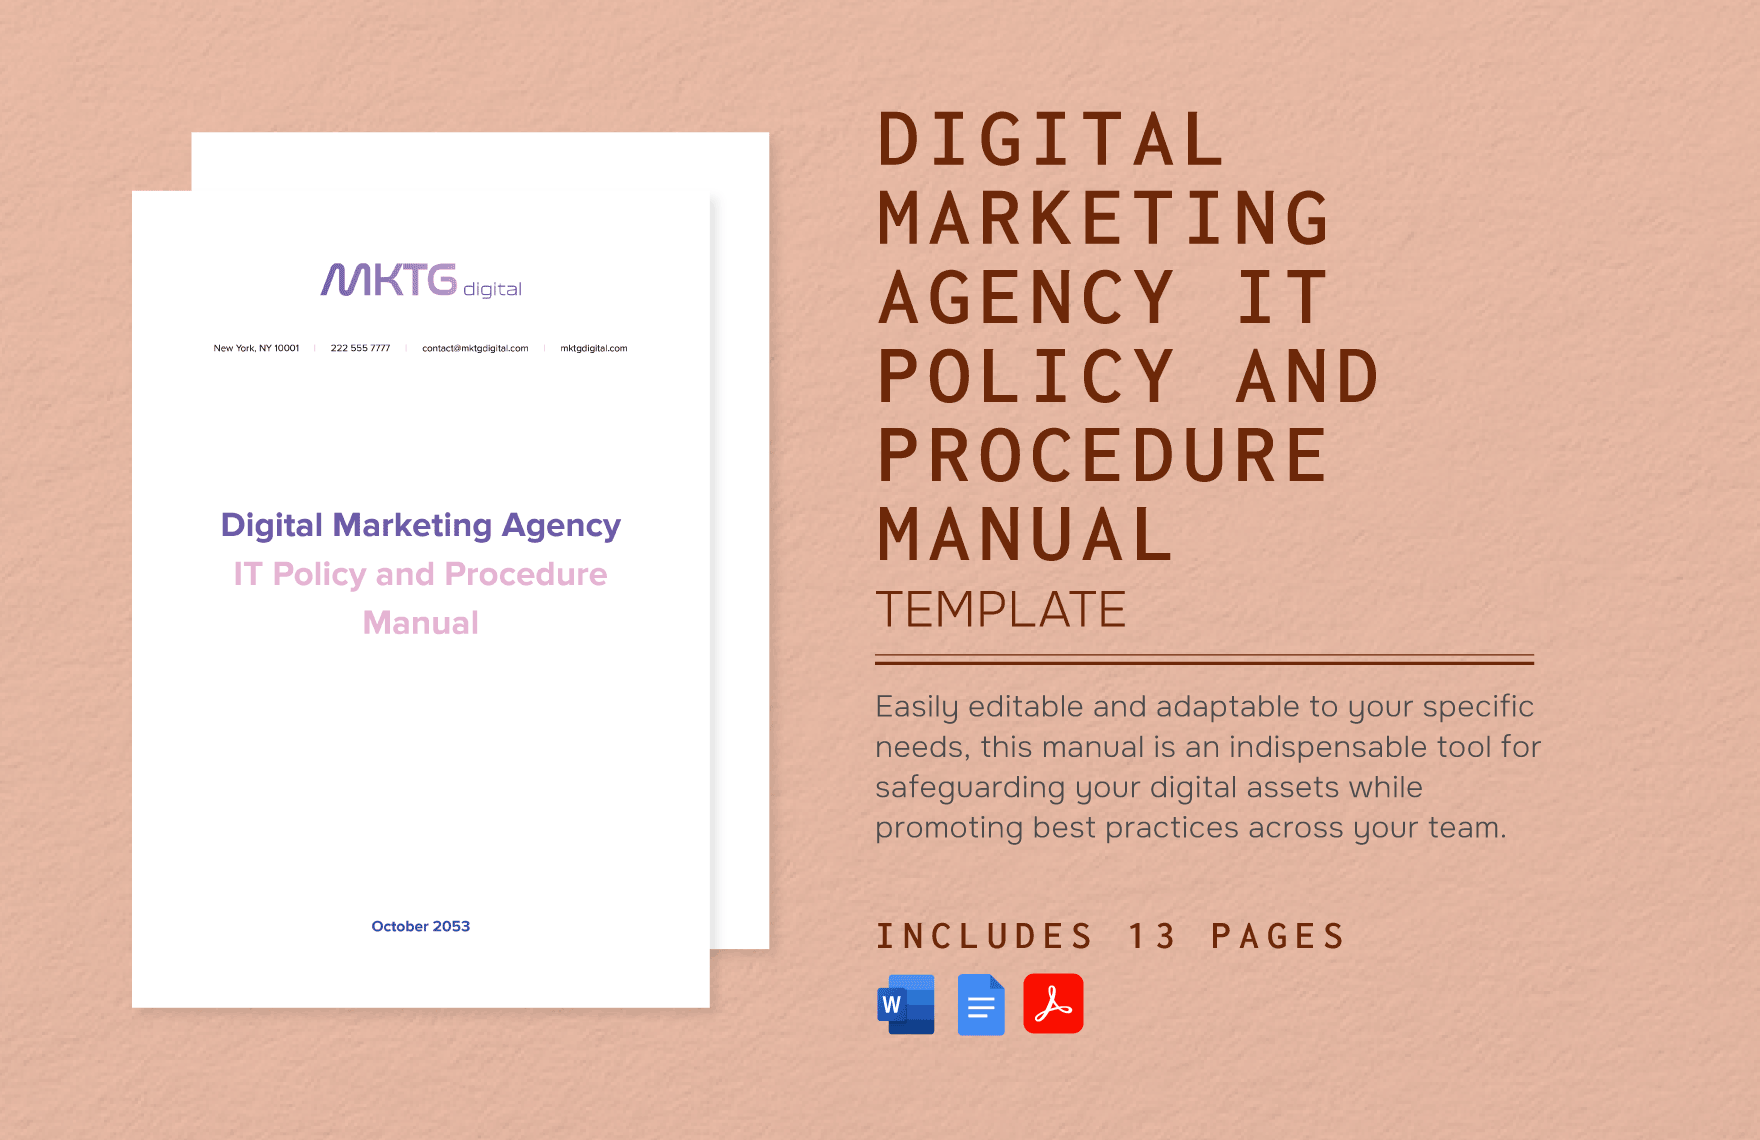 Digital Marketing Agency IT Policy and Procedure Manual Template in